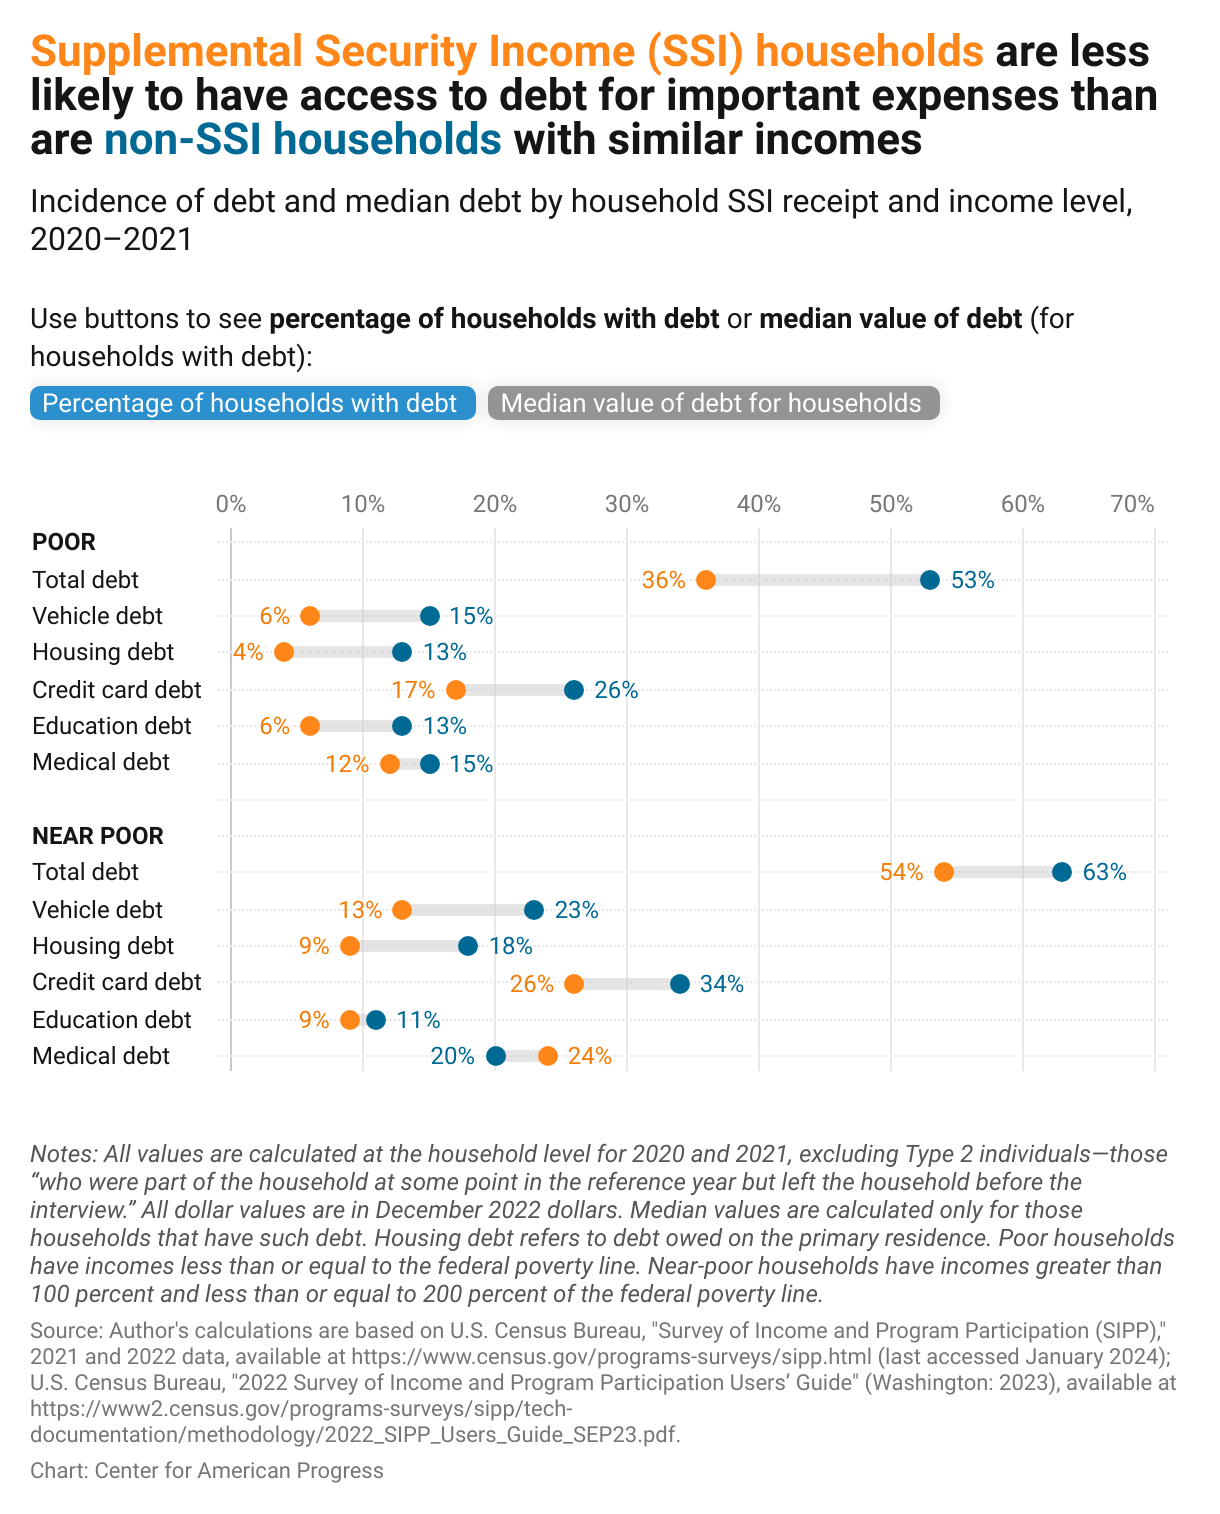 Chart showing that among low-income households, those that receive SSI benefits have a lower chance of having debt; for example, 36 percent of poor SSI households have debt, compared with 53 percent of non-SSI households.